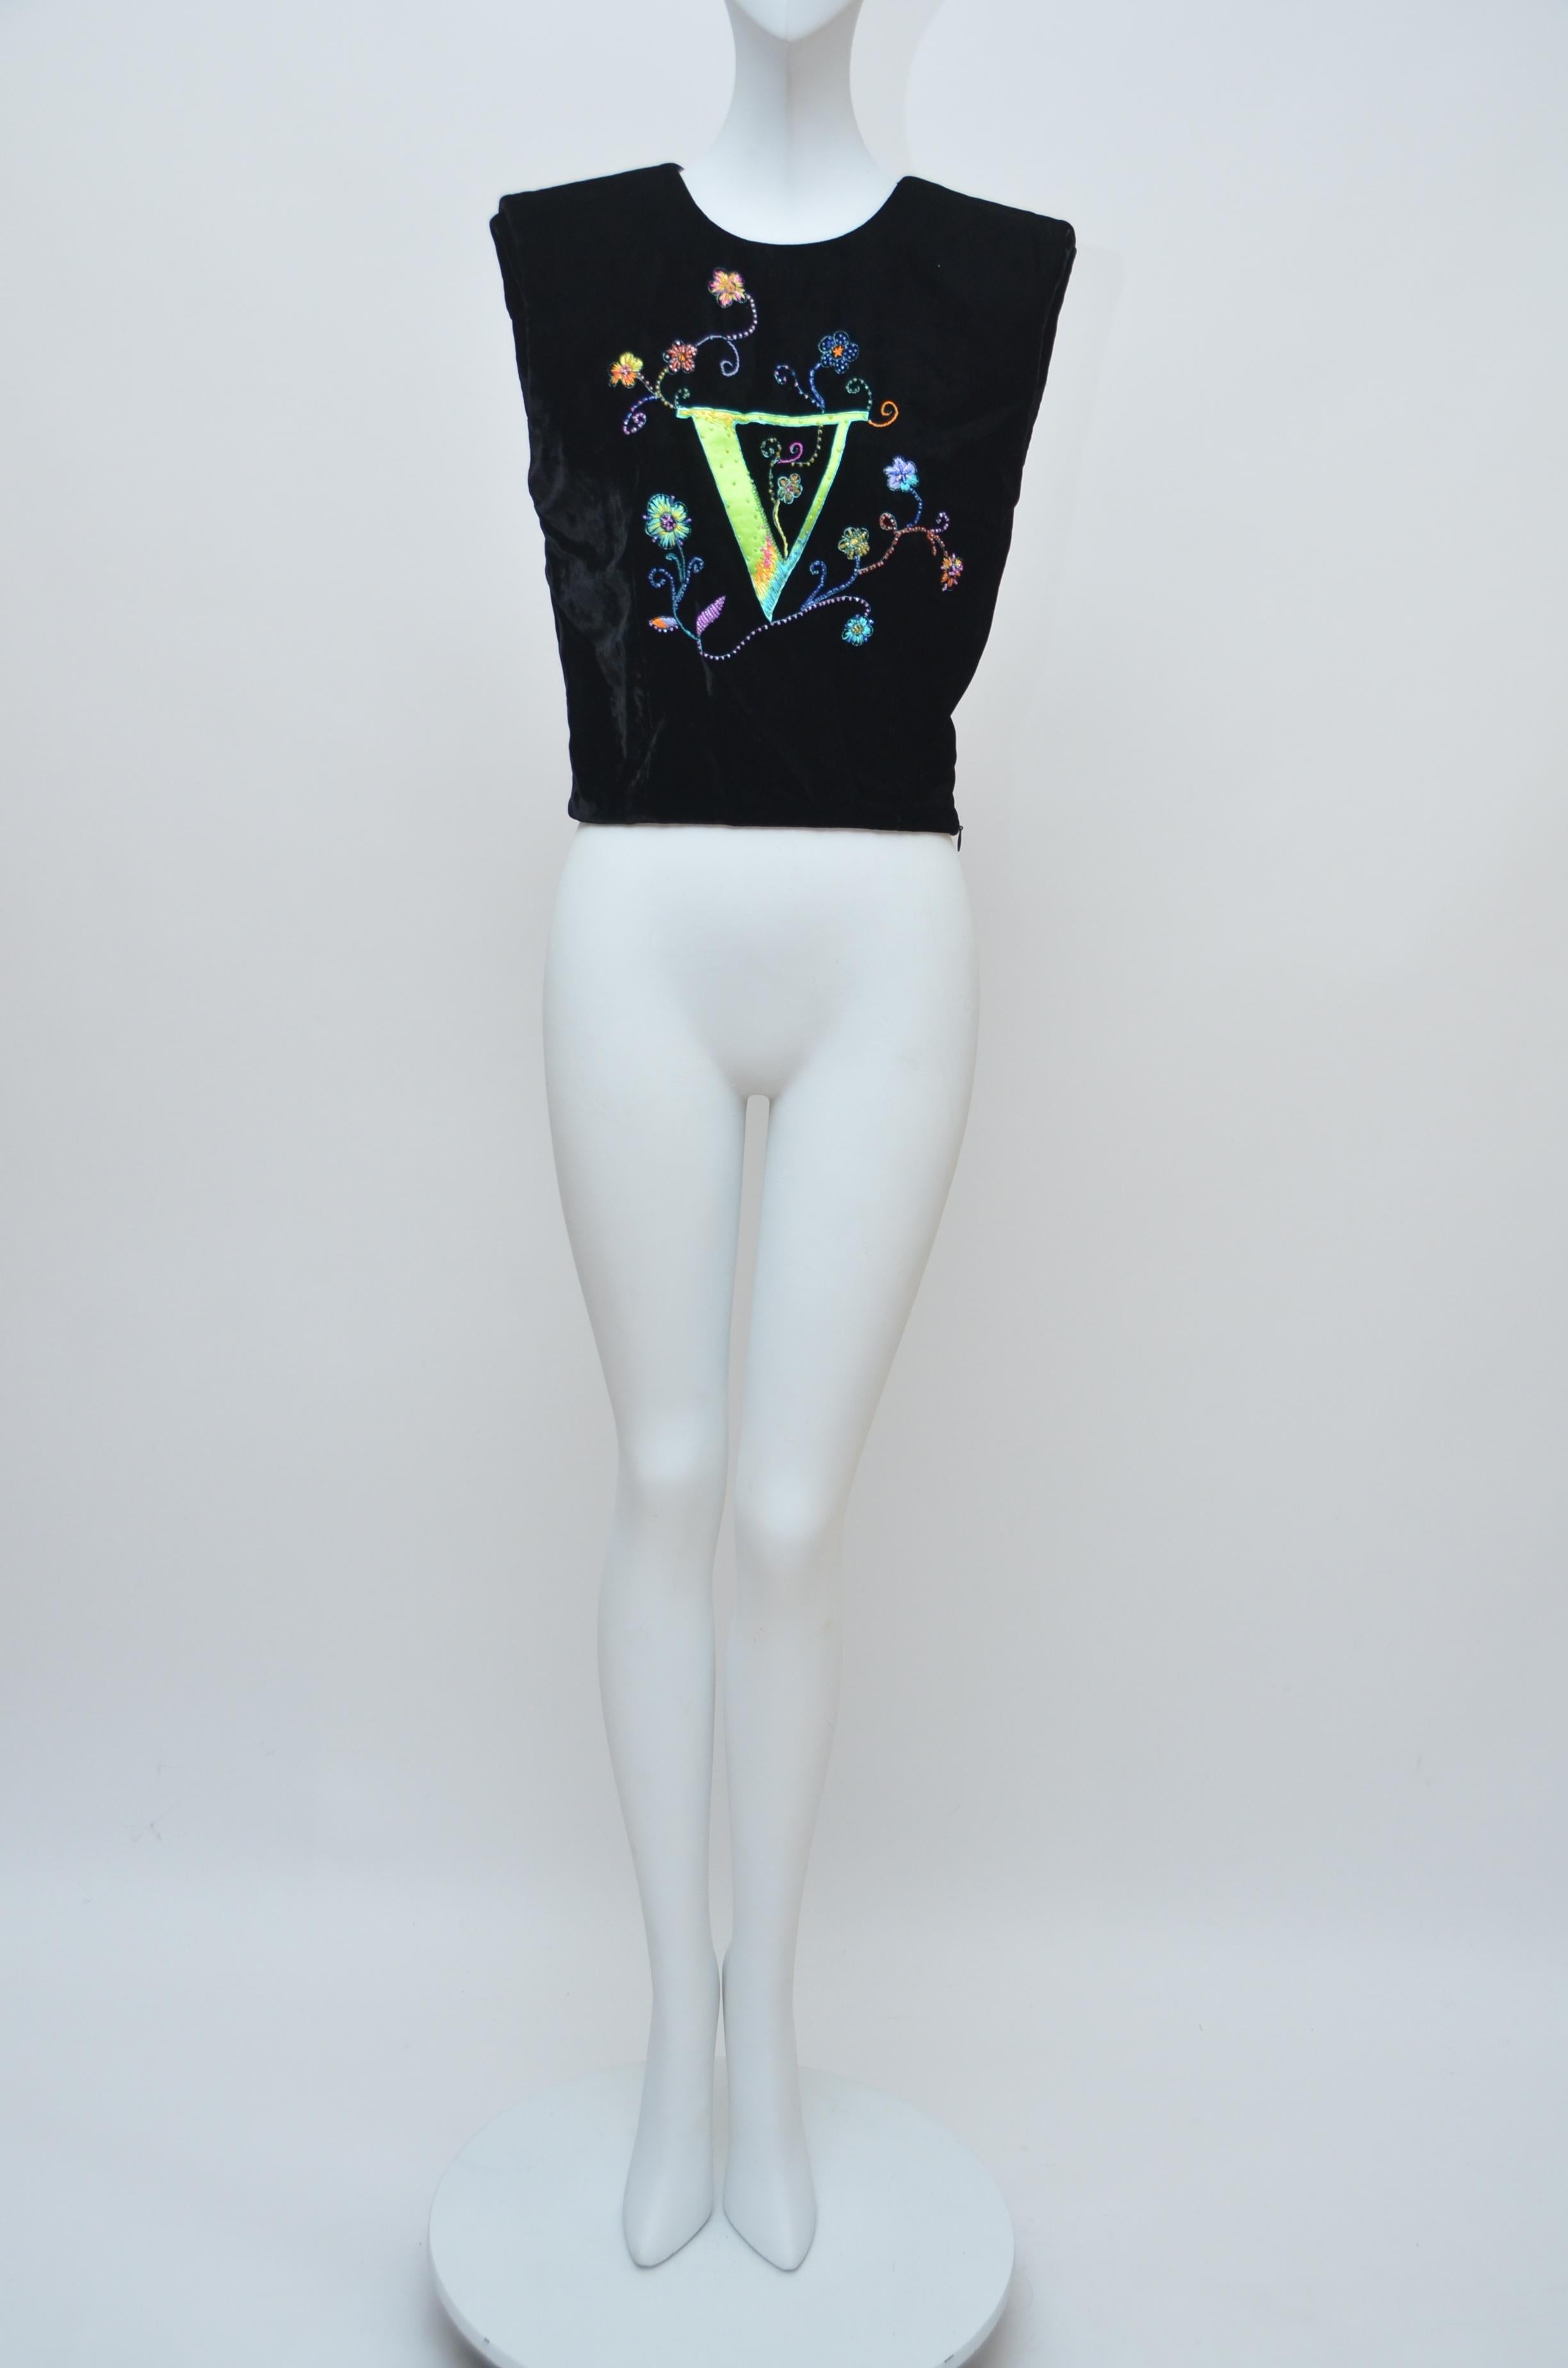 Very rare Atelier Versace black velvet embellished crop top
Shoulders have cushions and they could easily be removed 
This beautiful top could be worn with skirt or jeans.
2 closure zippers:one on the side and one on the back.
Excellent mint